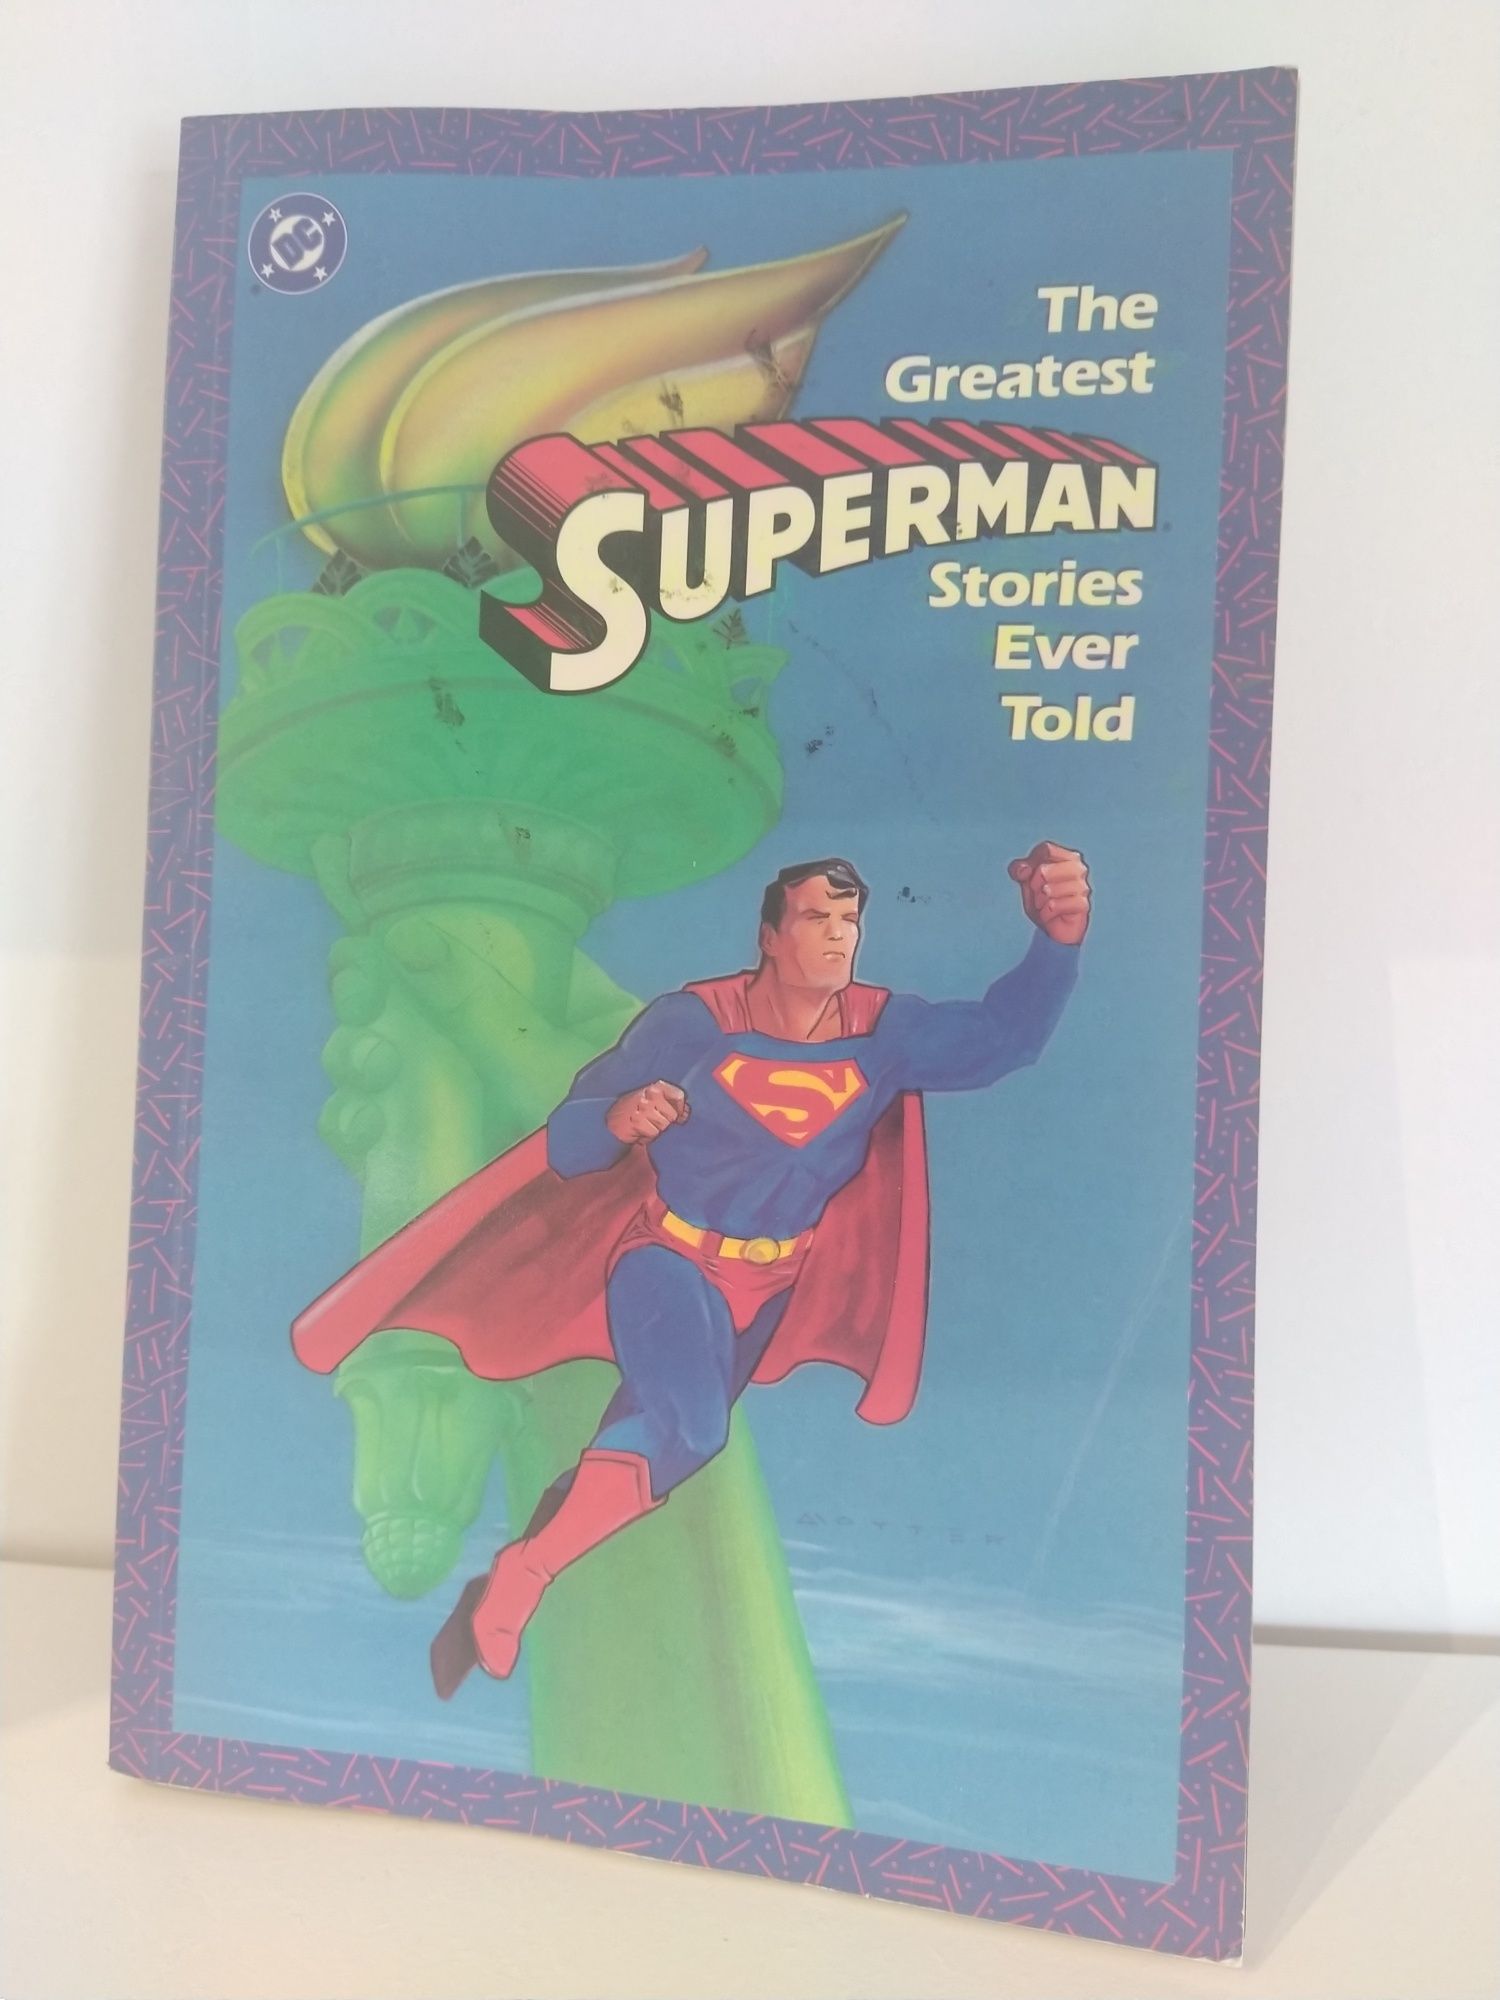 The Greatest Superman Stories Ever Told